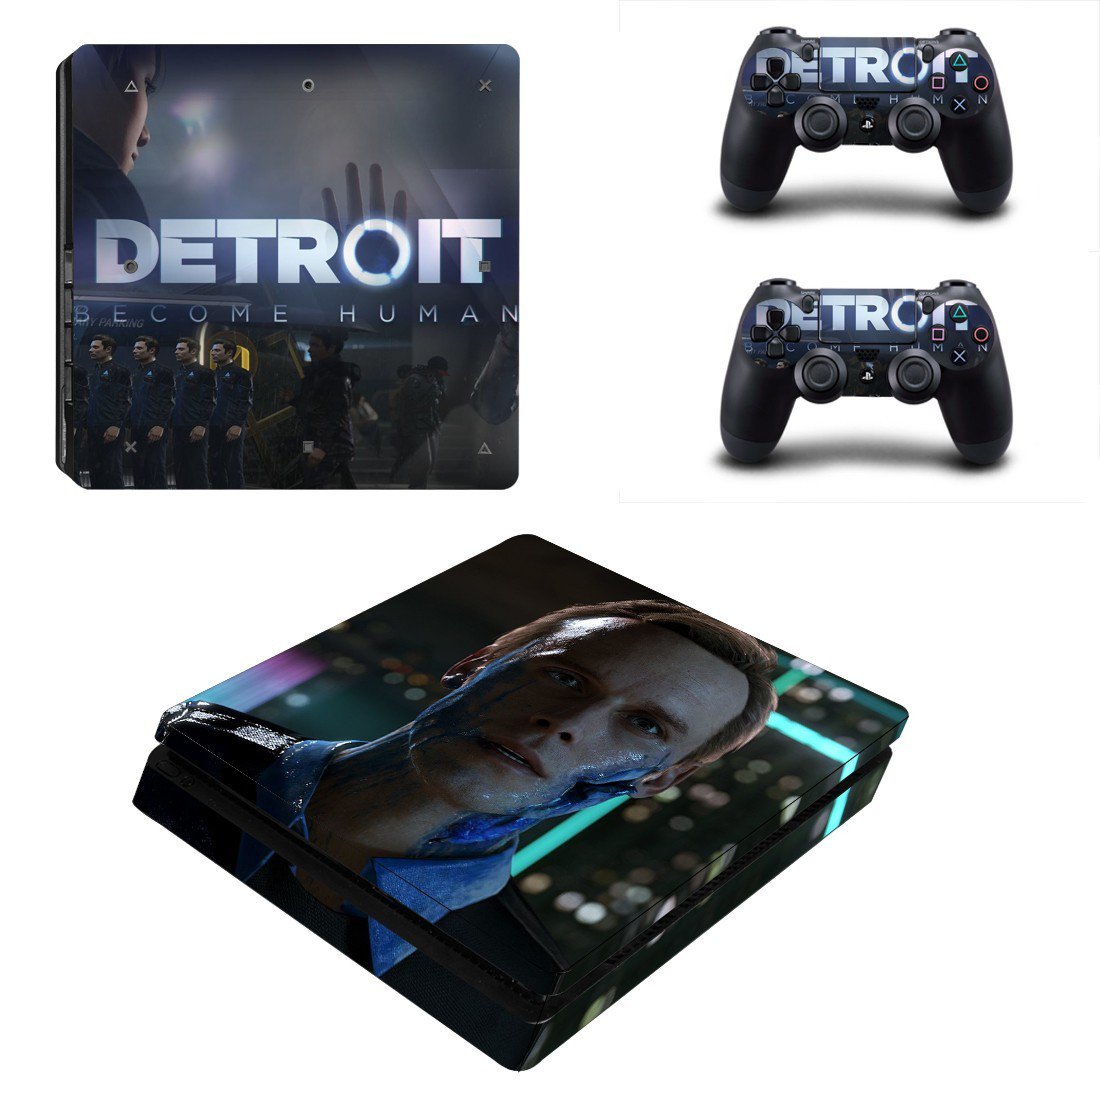 PS4 Slim And Controllers Skin Sticker - Detroit Become Human Design 2